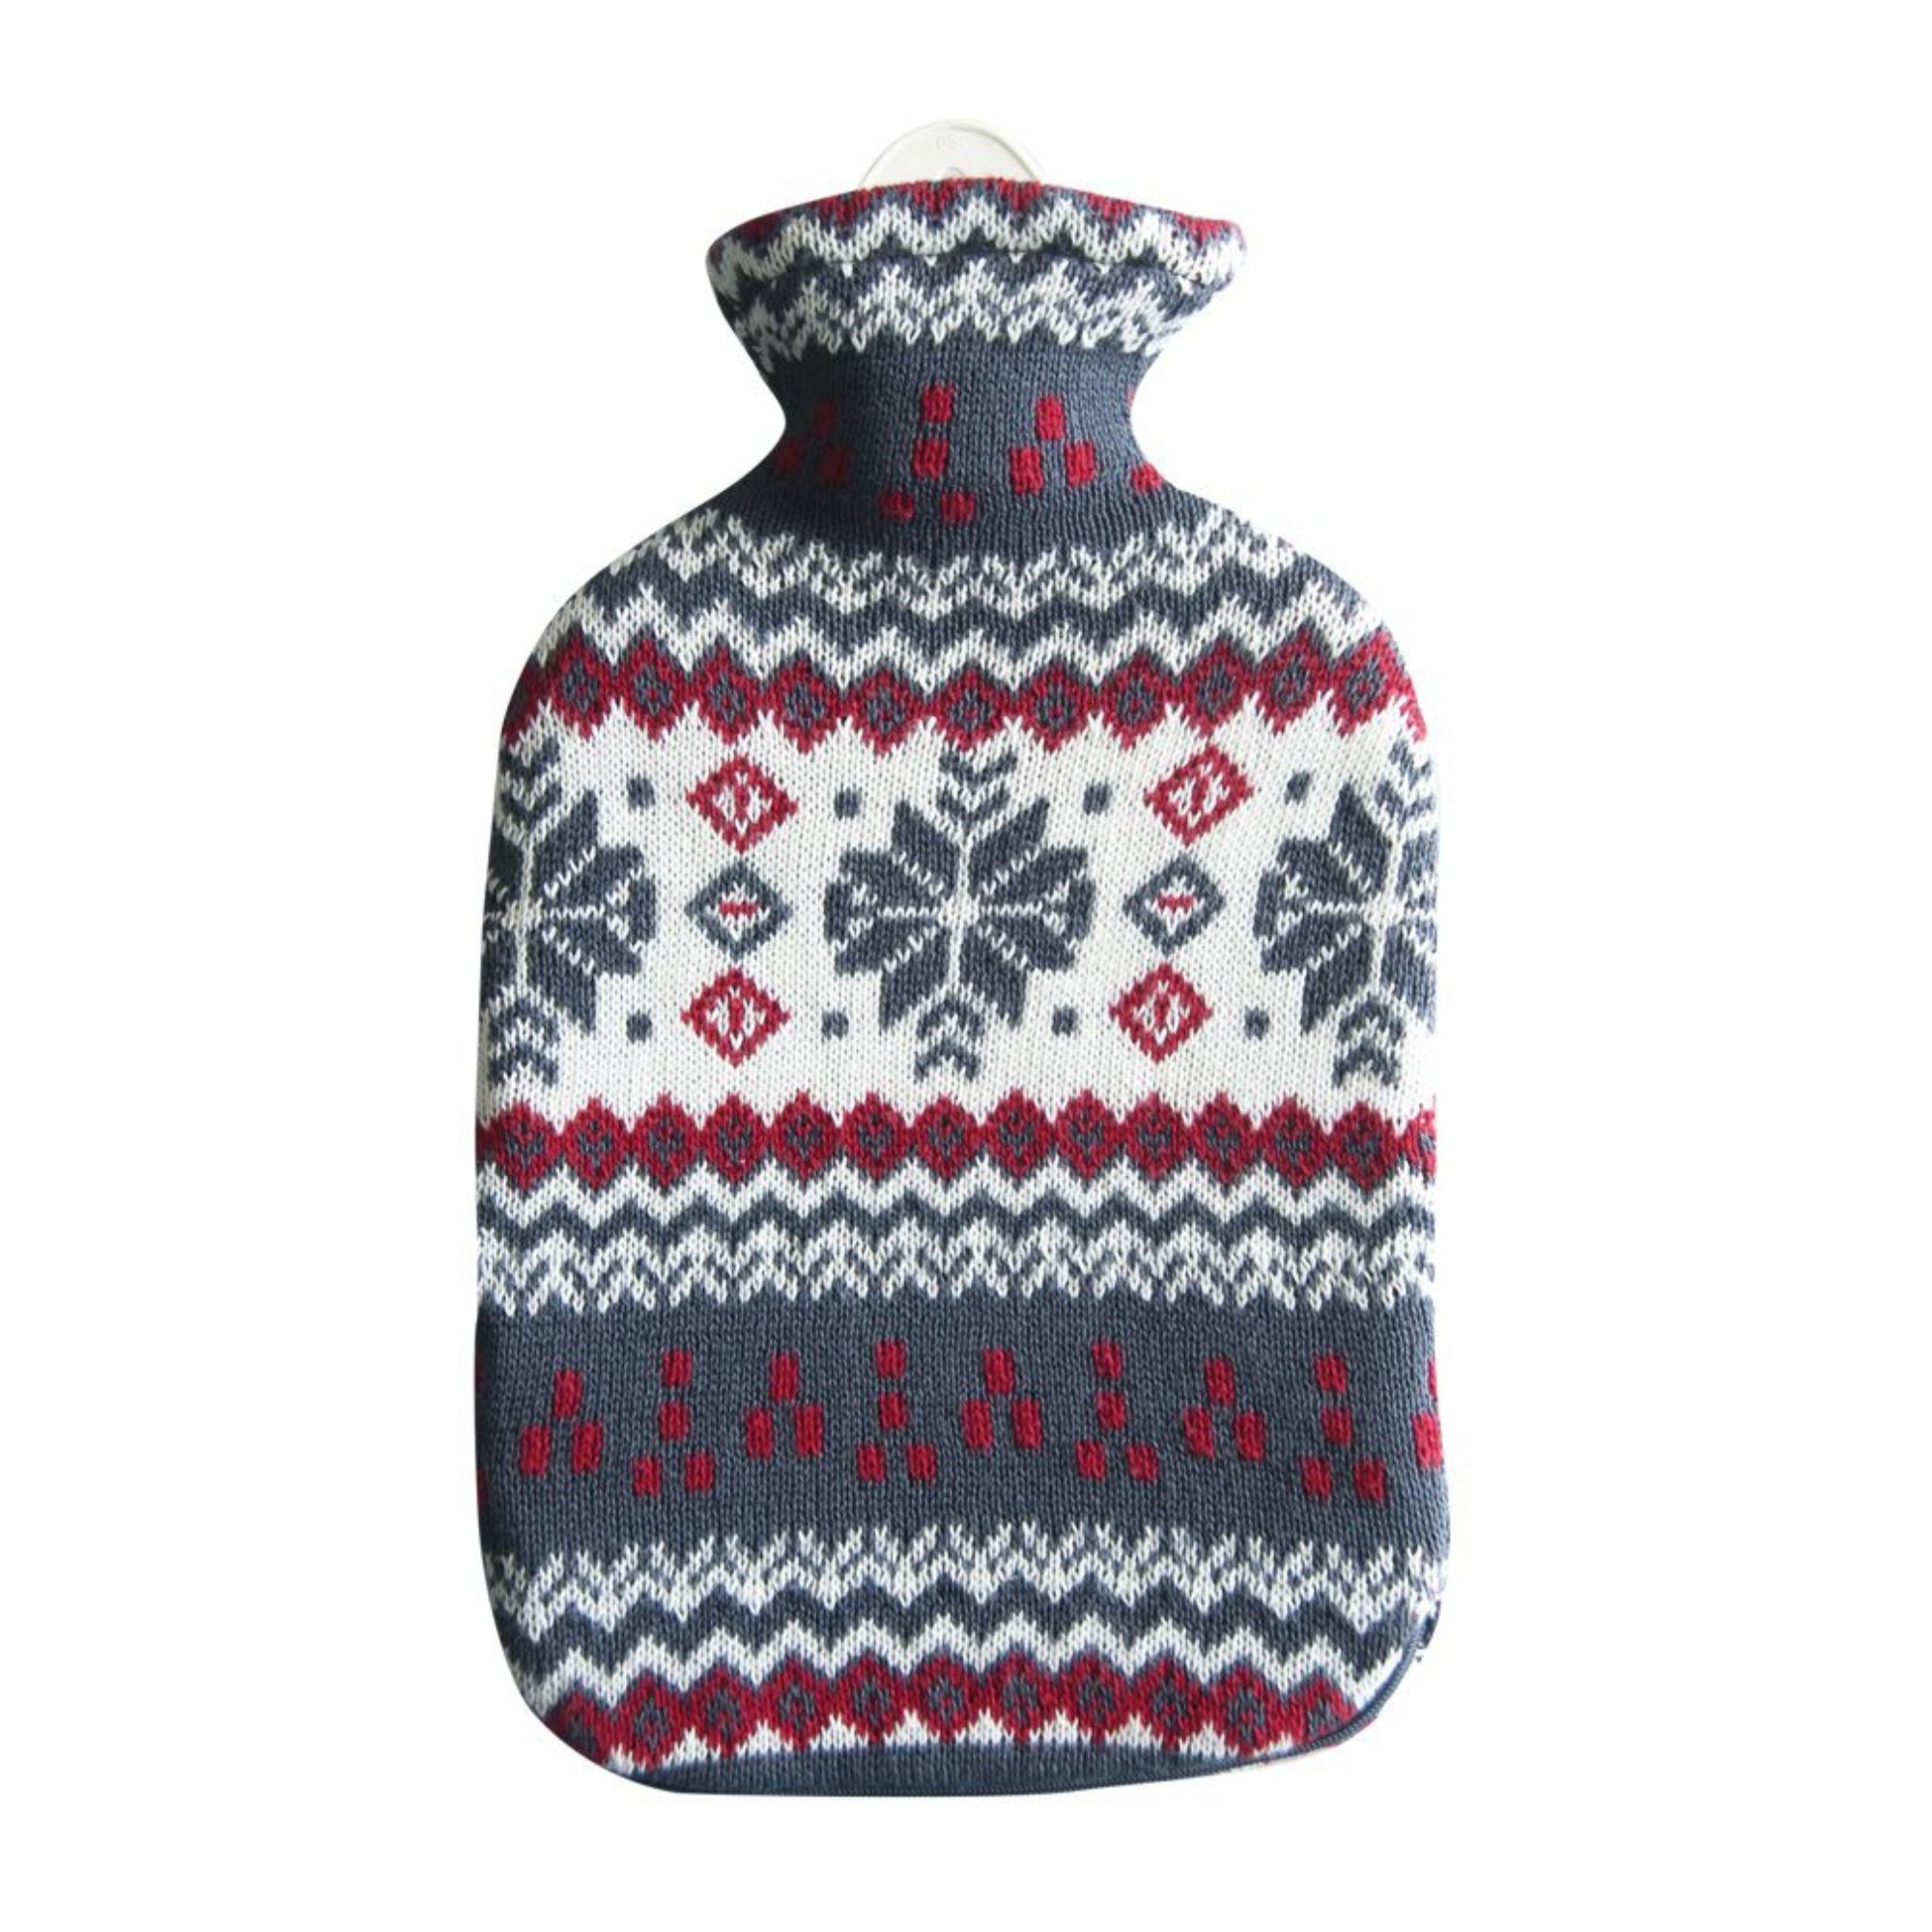 2 Litre Sanger Hot Water Bottle with Knitted Snowflake Print Cotton Cover